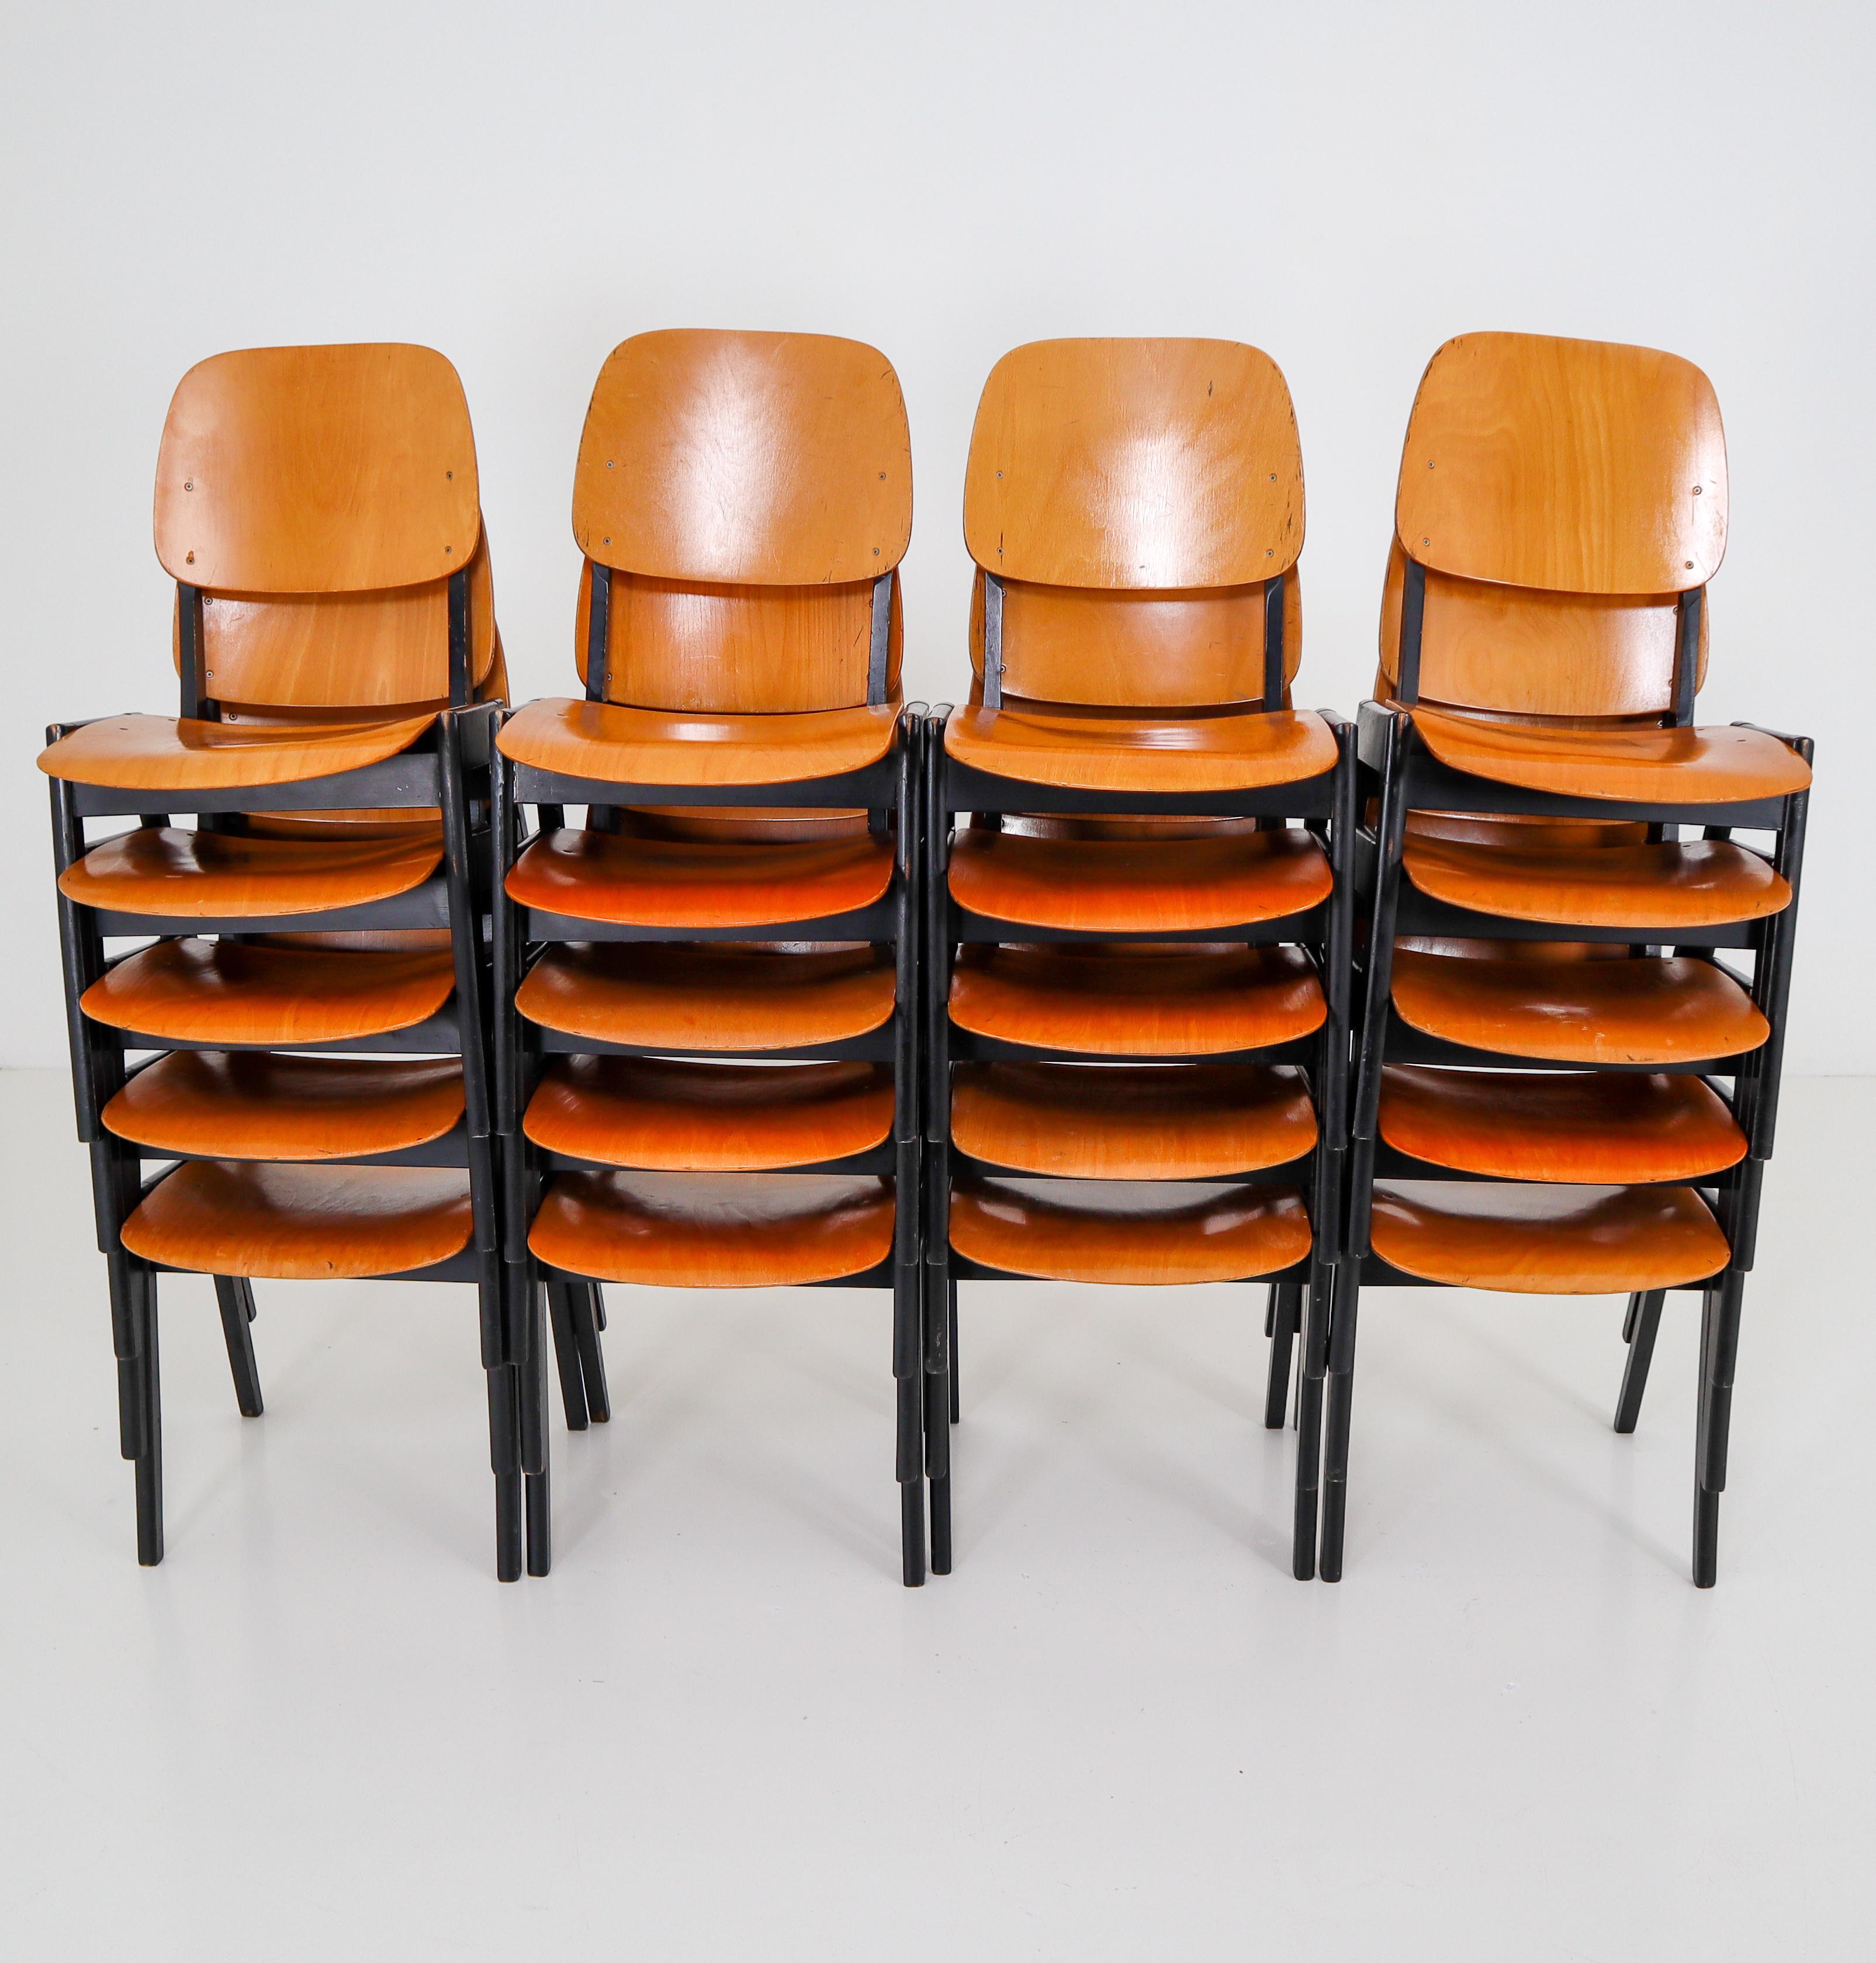 50 Bicolored Stacking Chairs Designed in the Manner of Roland Rainer, 1960s 2